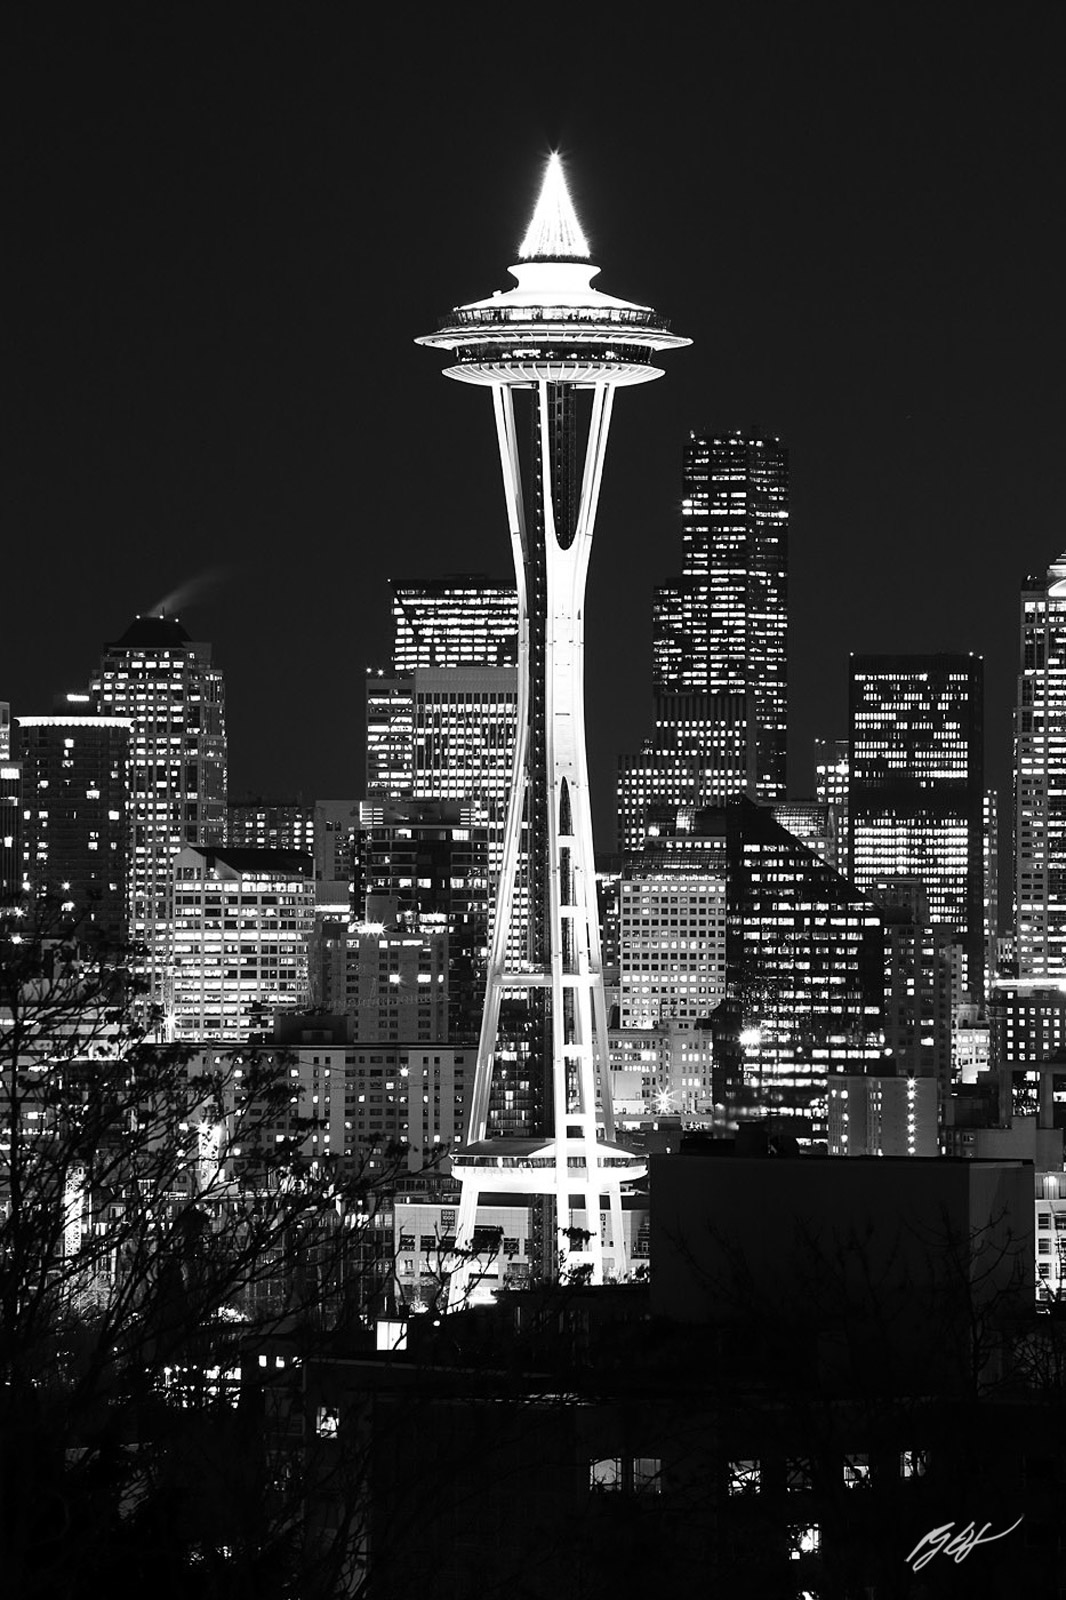 Space Needle at Night from Kerry Park on Queen Ann Hill in Seattle Washington